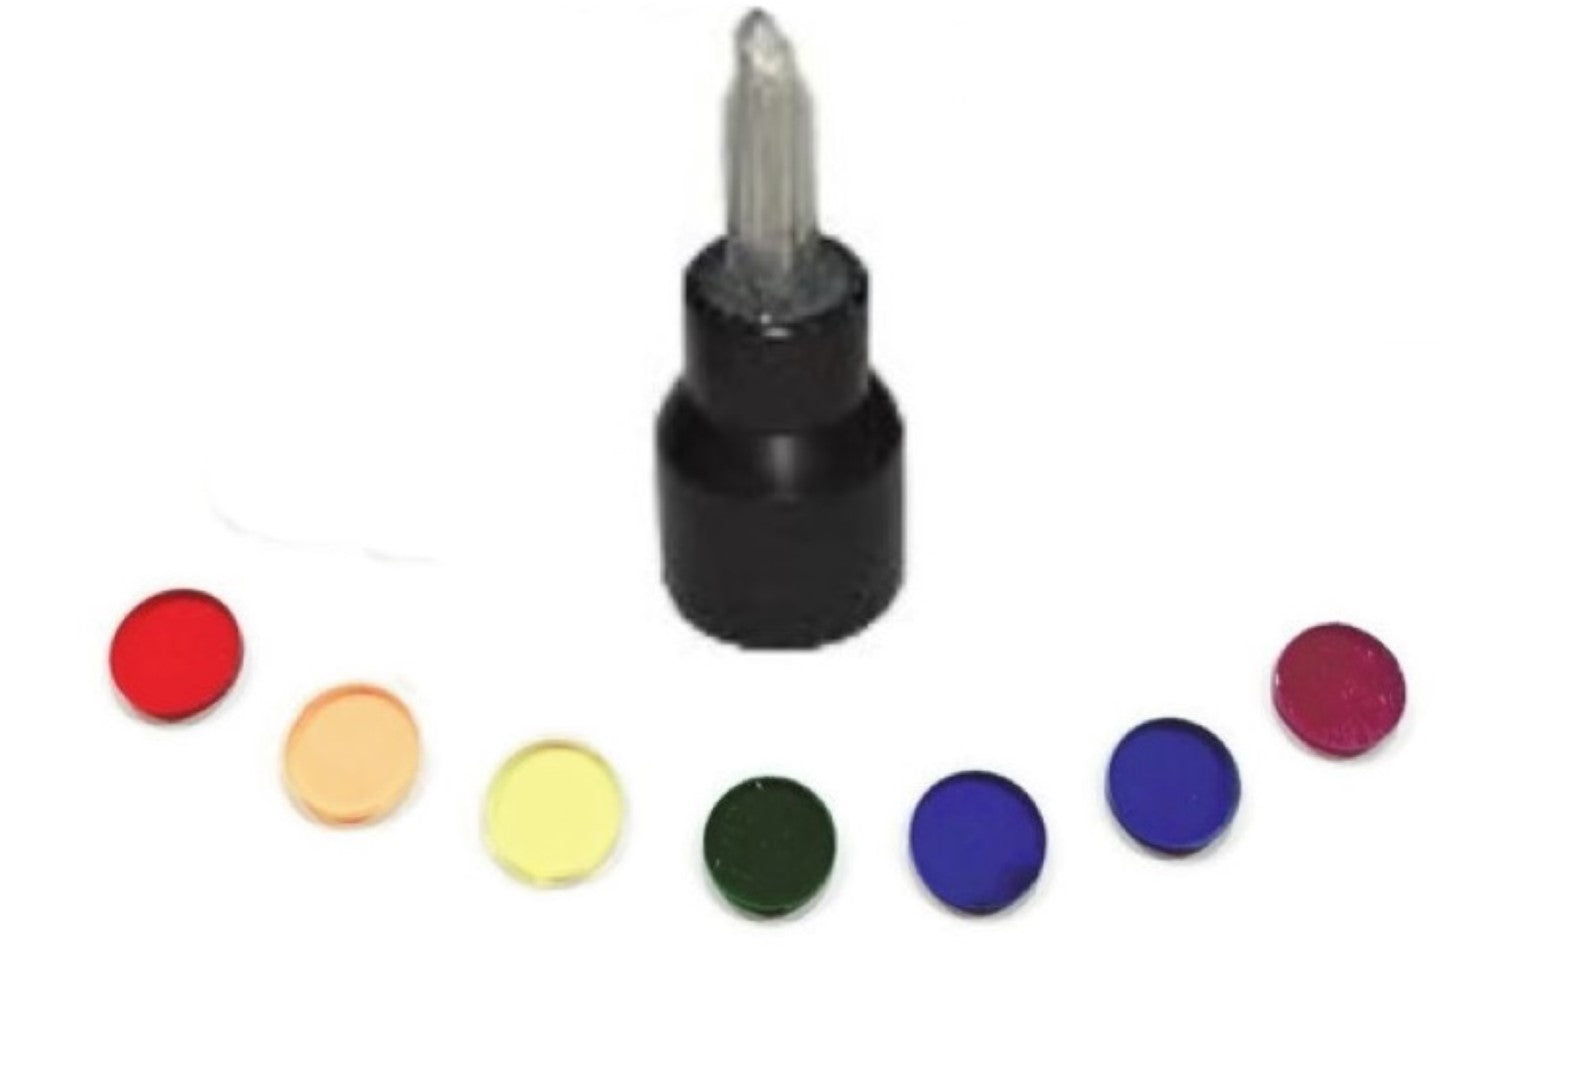 Crystal Light Balancing Torch, colour Discs, Tip REPLACEMENTS, MAGLIGHT GLOBES